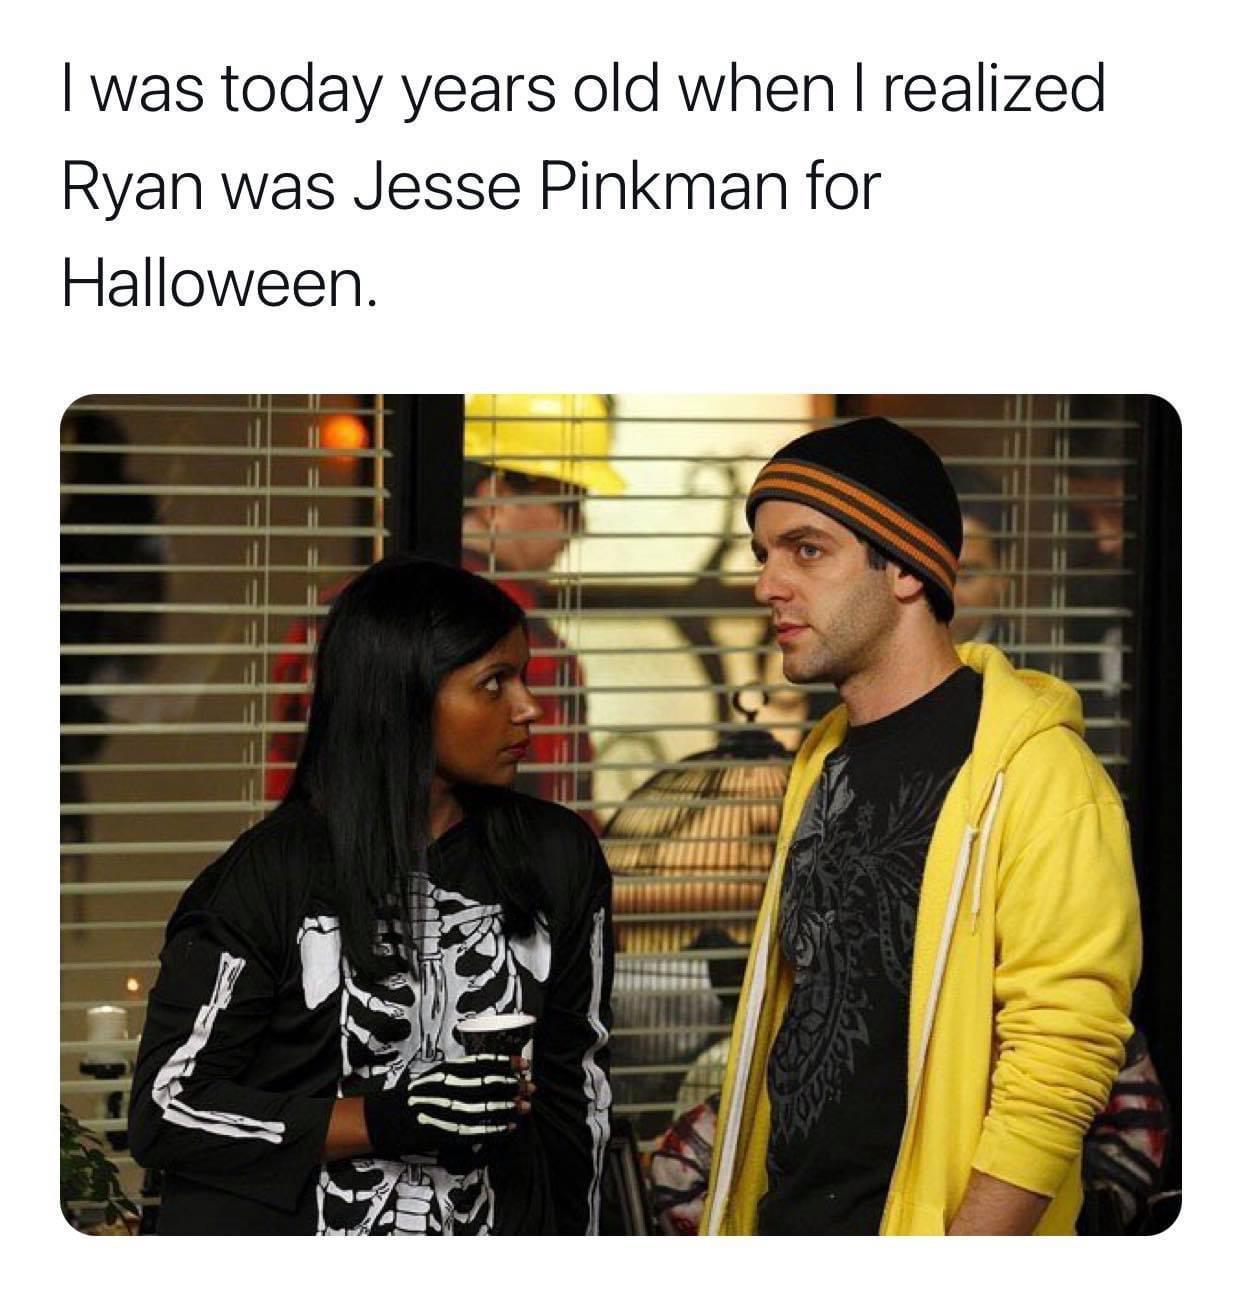 jesse pinkman skeleton - I was today years old when I realized Ryan was Jesse Pinkman for Halloween.